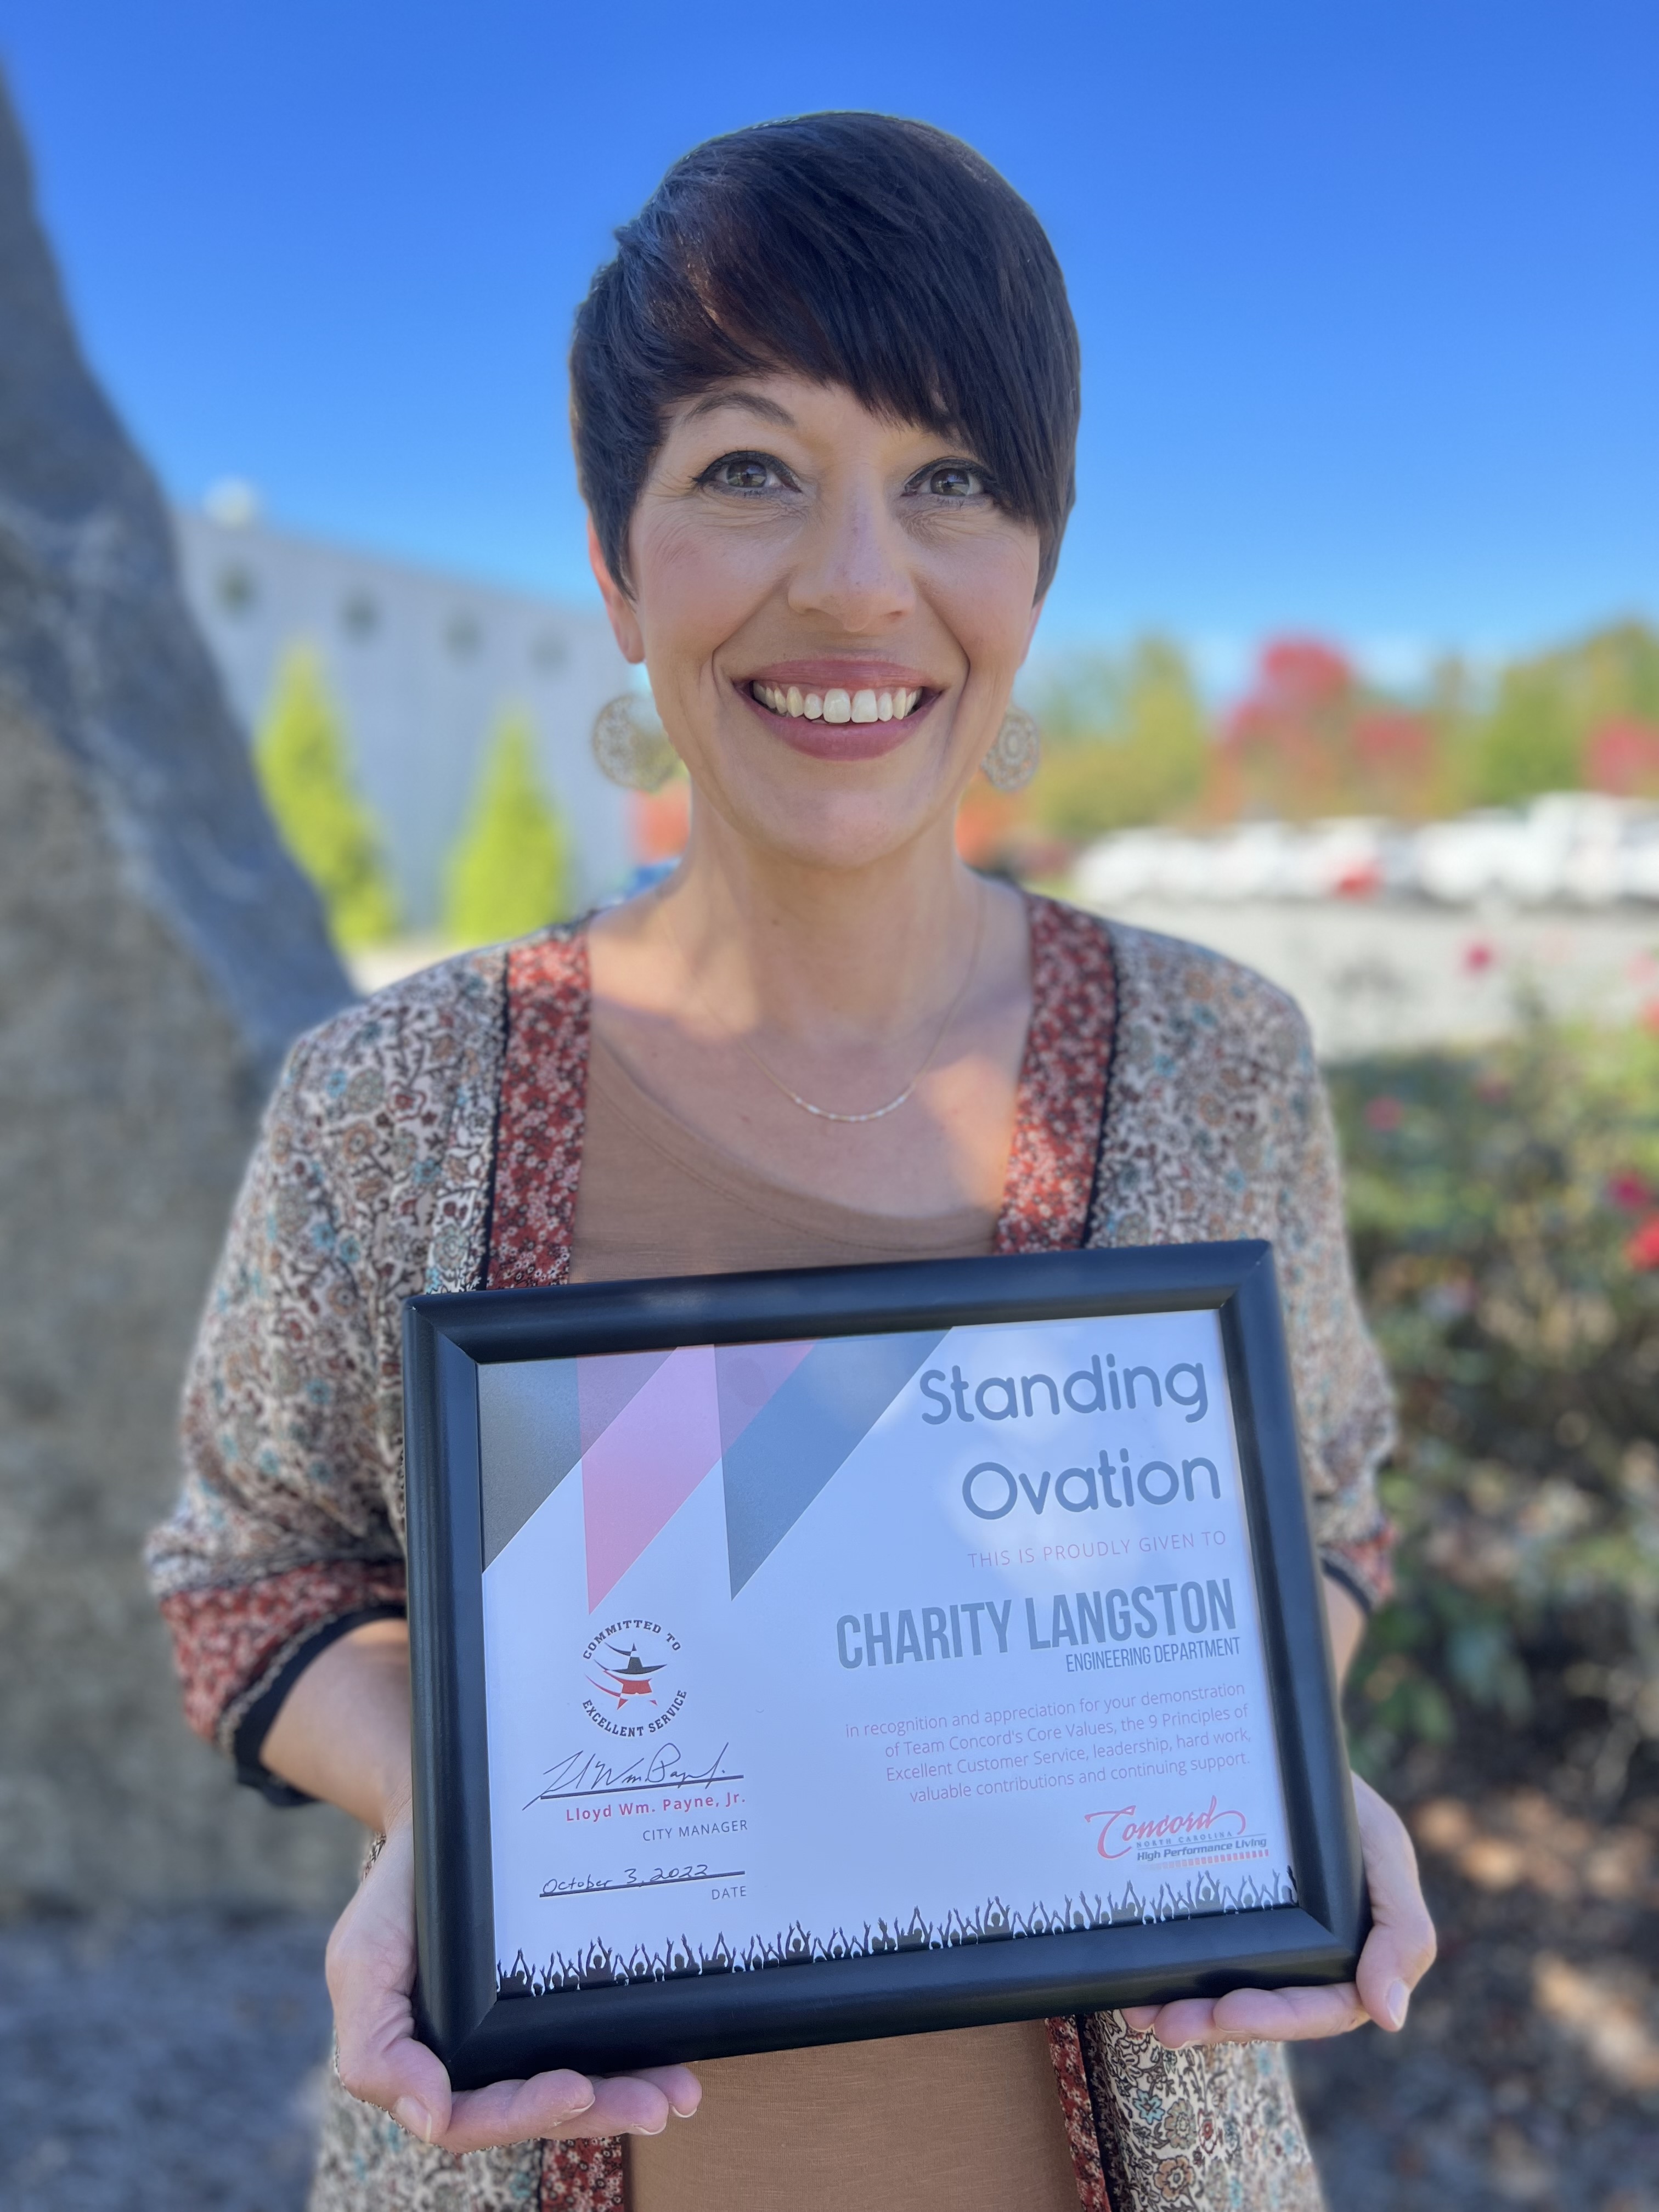 Charity Langston holding Standing Ovation Award Certificate